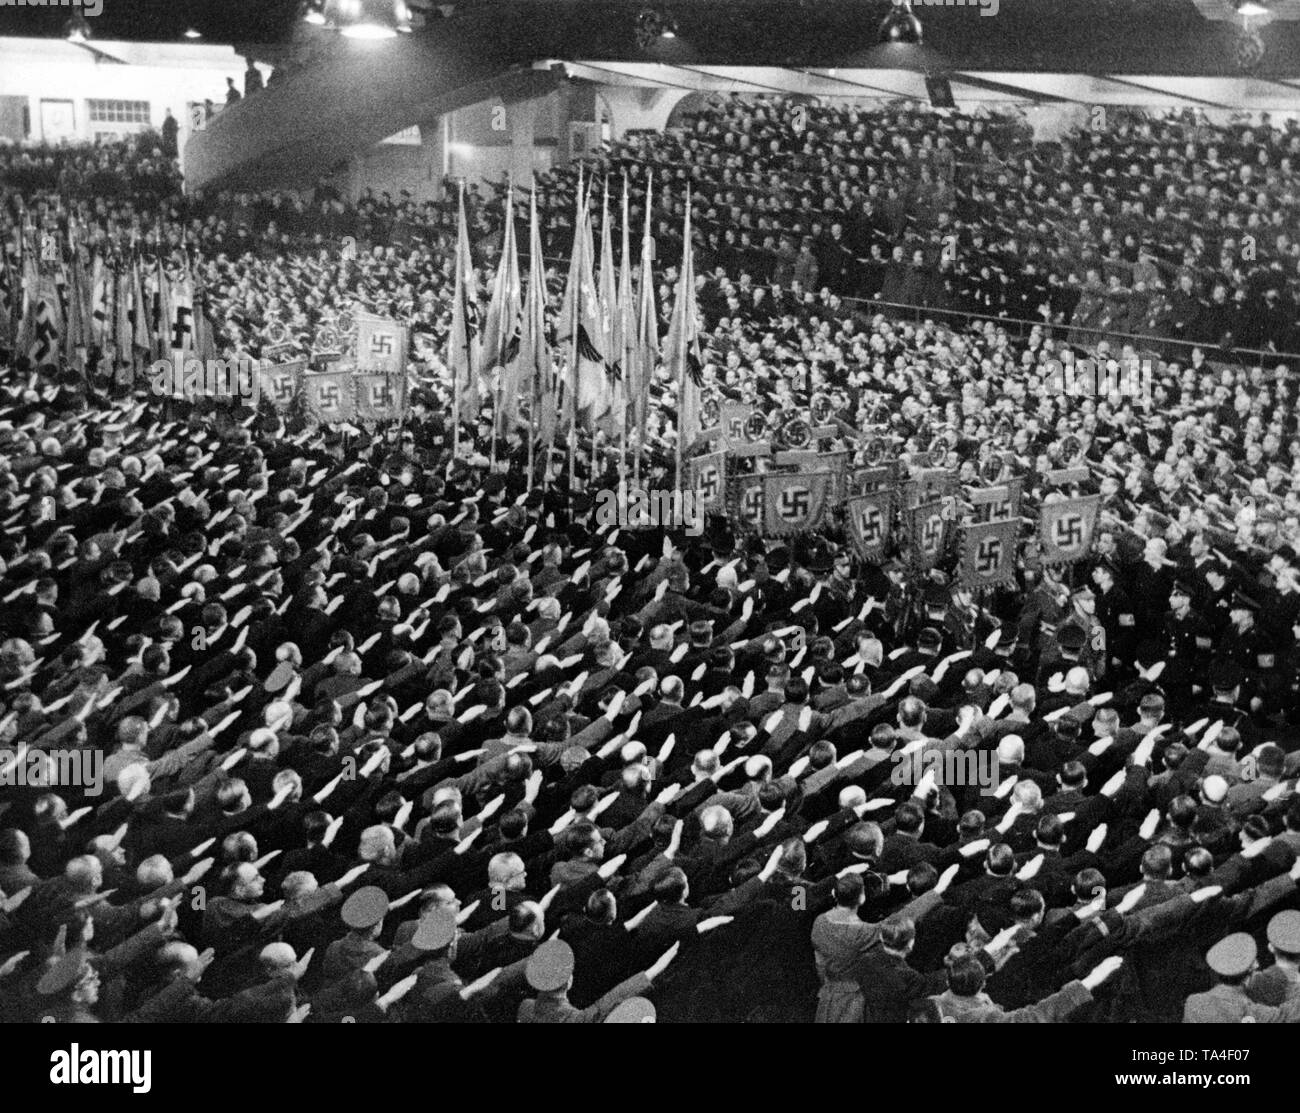 At a rally of the NSDAP, where Adolf Hitler is giving a speech, the participants rise to the entry of the flags of the Nazi regime, and raise their arms to perform the Nazi salute. Photo: Schwahn Stock Photo